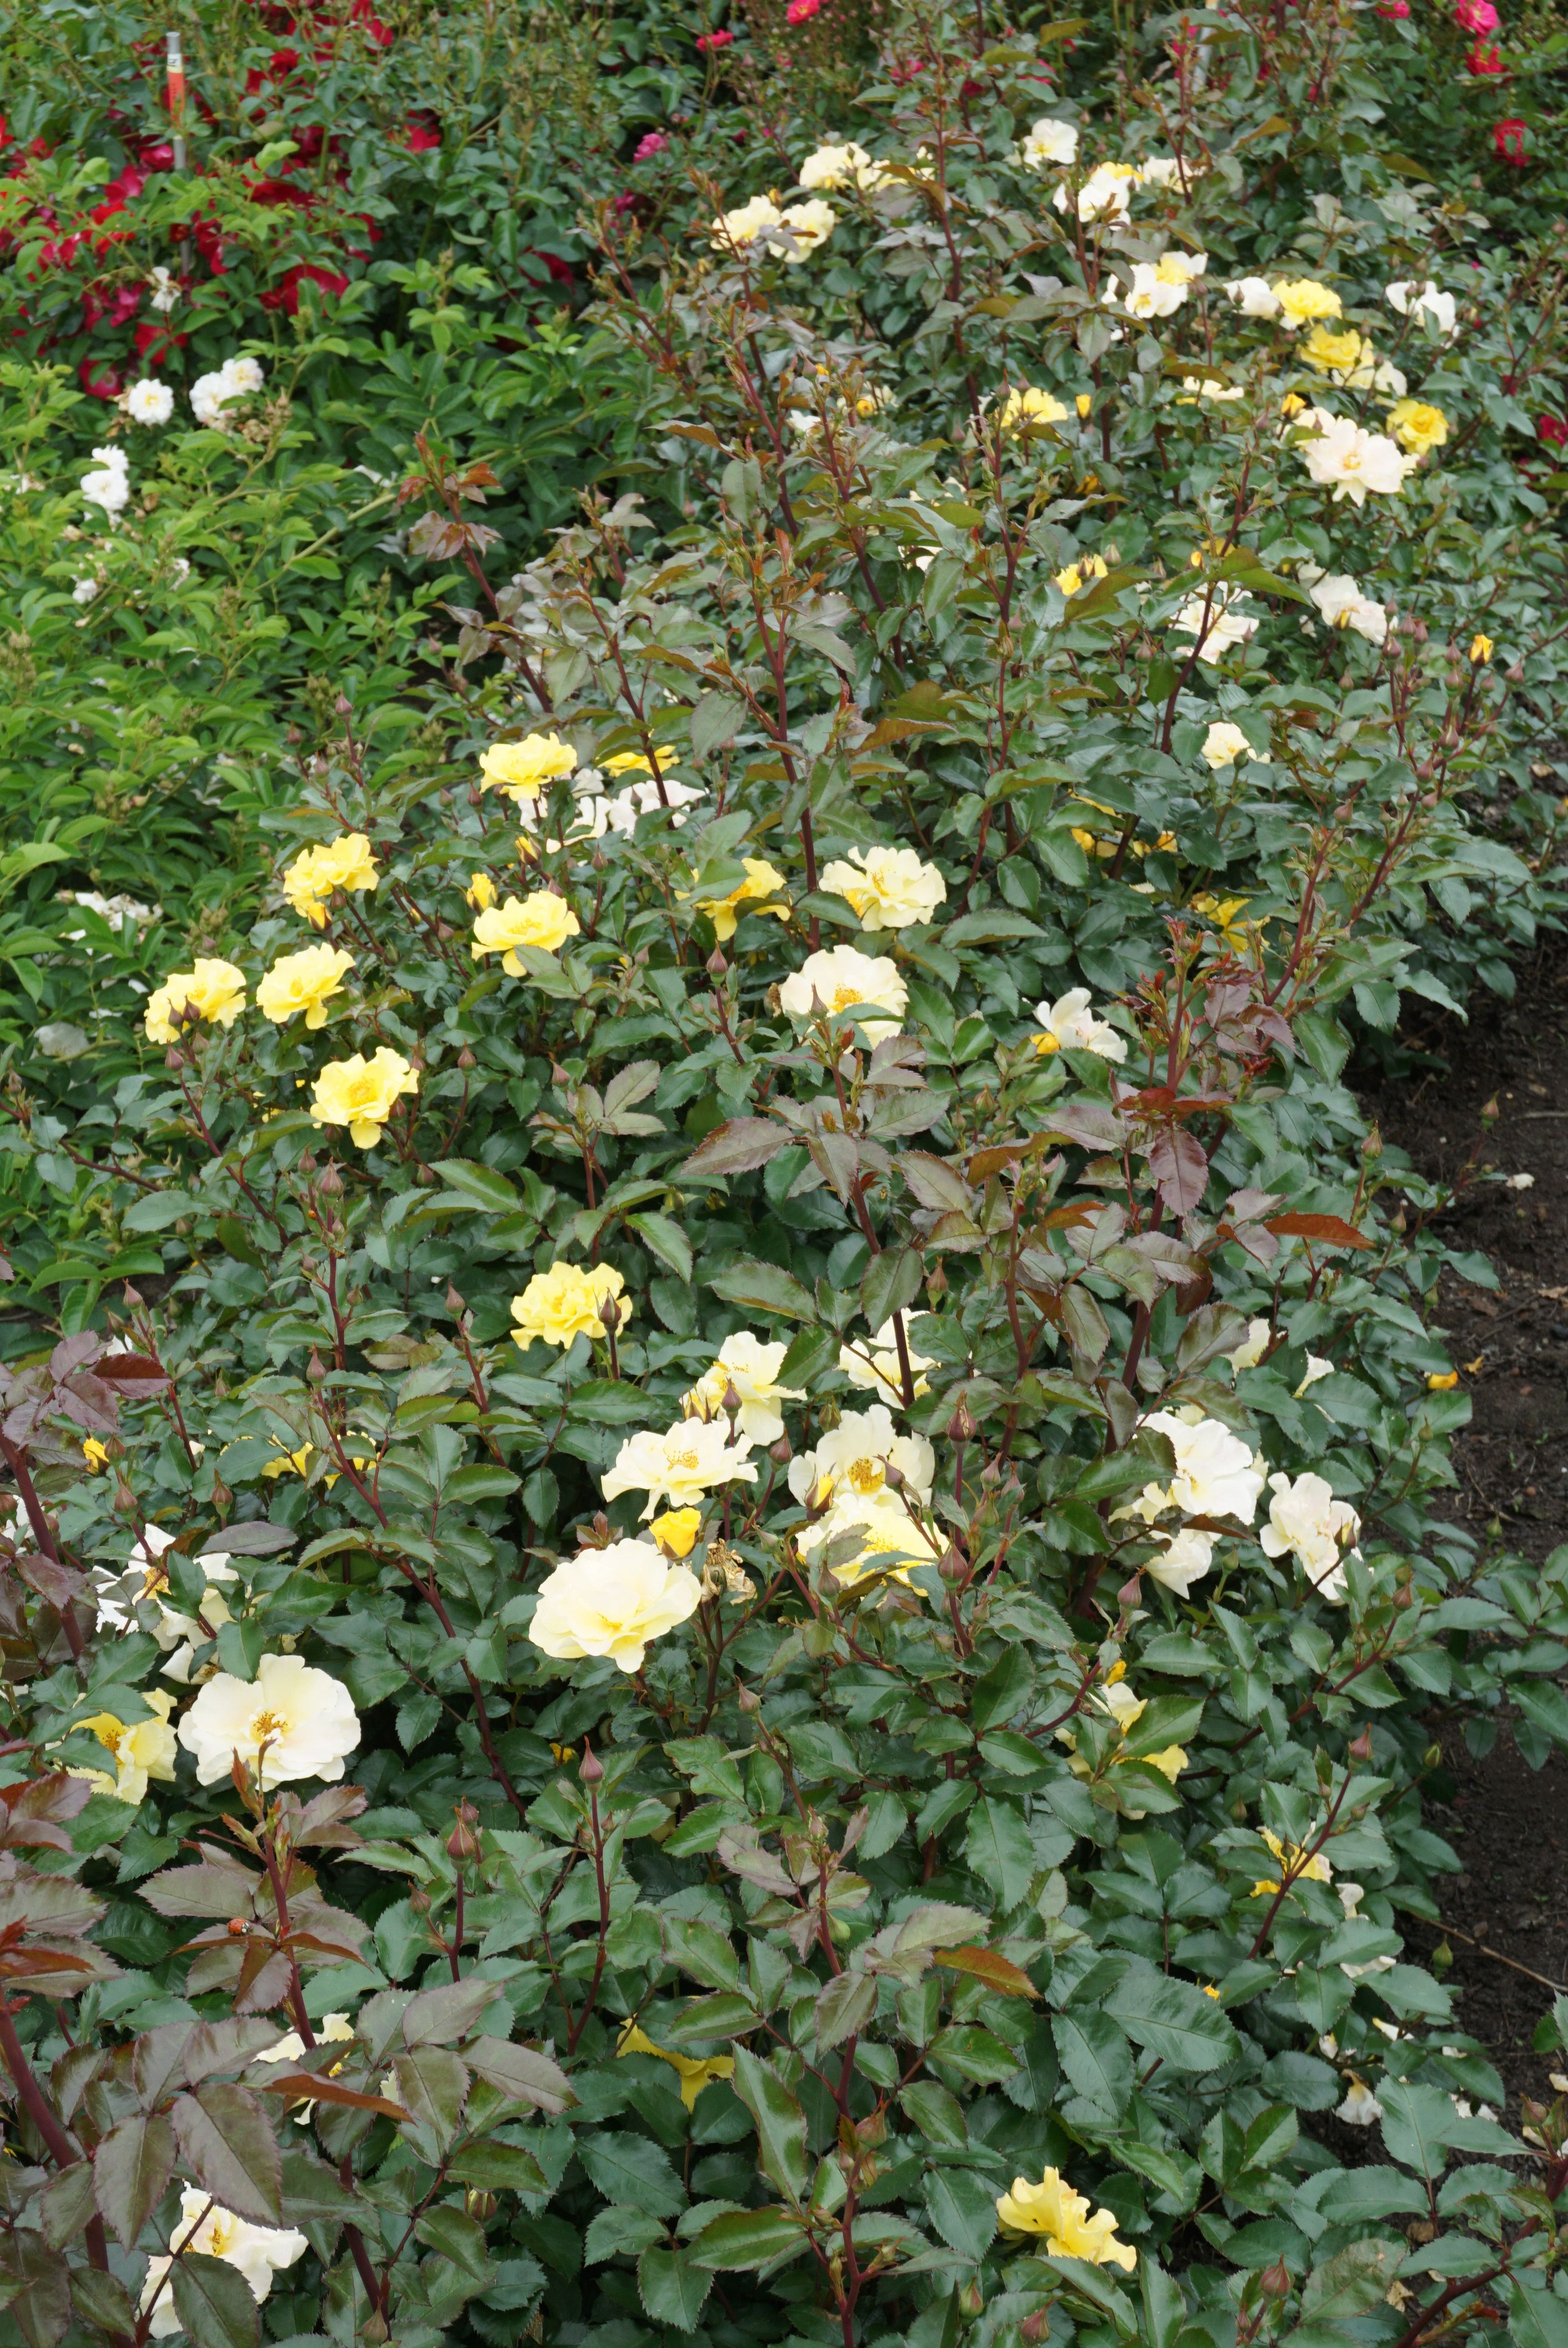 images/plants/rosa/ros-nitty-gritty-yellow/ros-nitty-gritty-yellow-0003.jpg